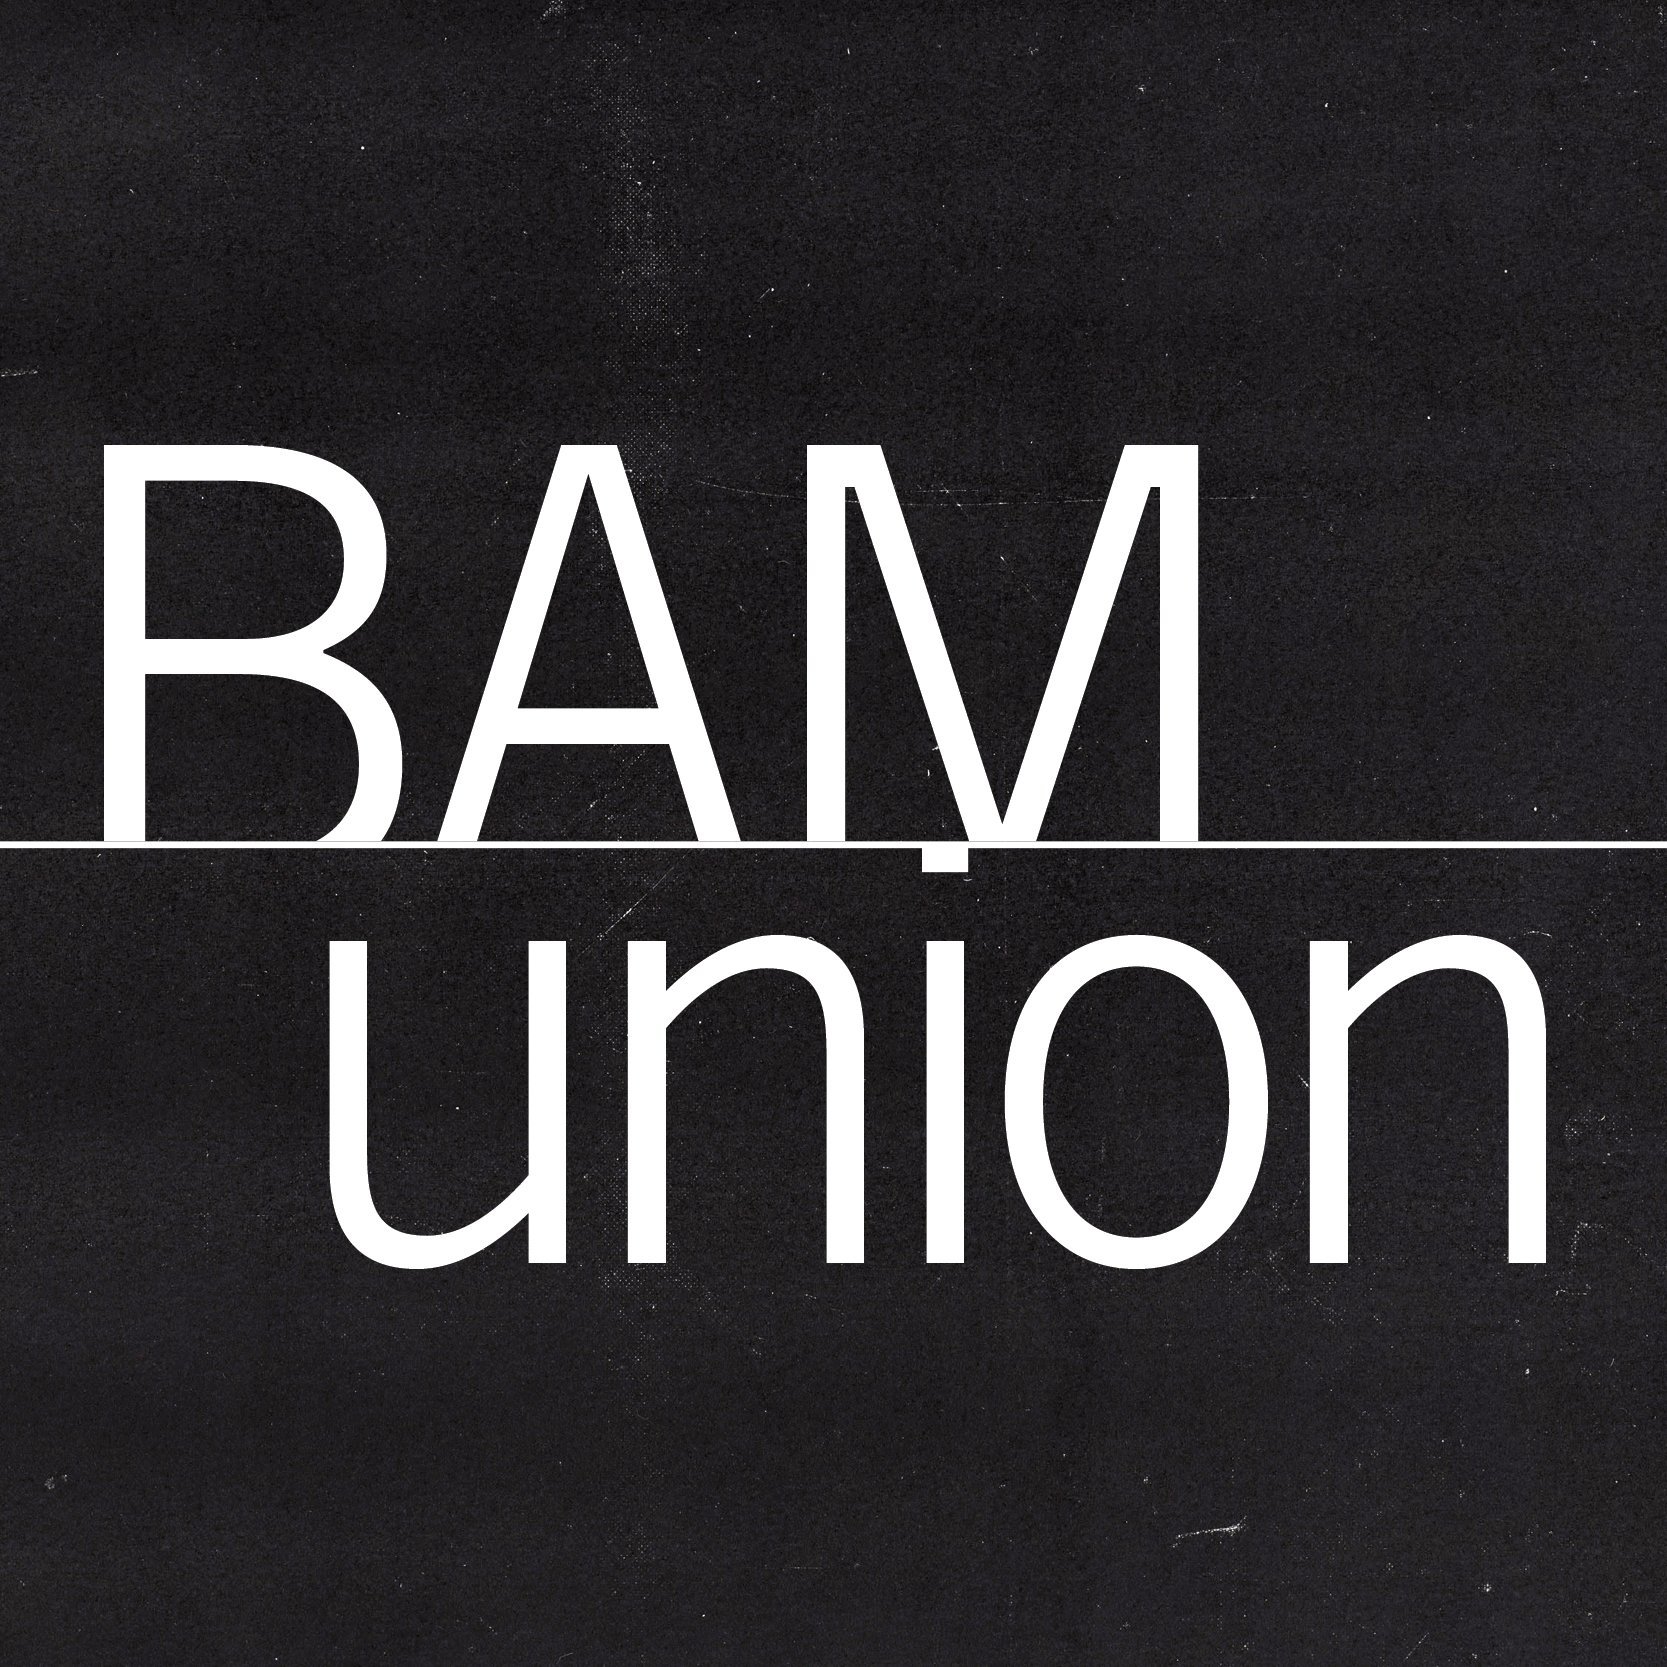 For BAM staff, by BAM staff.  
UAW Local 2110.